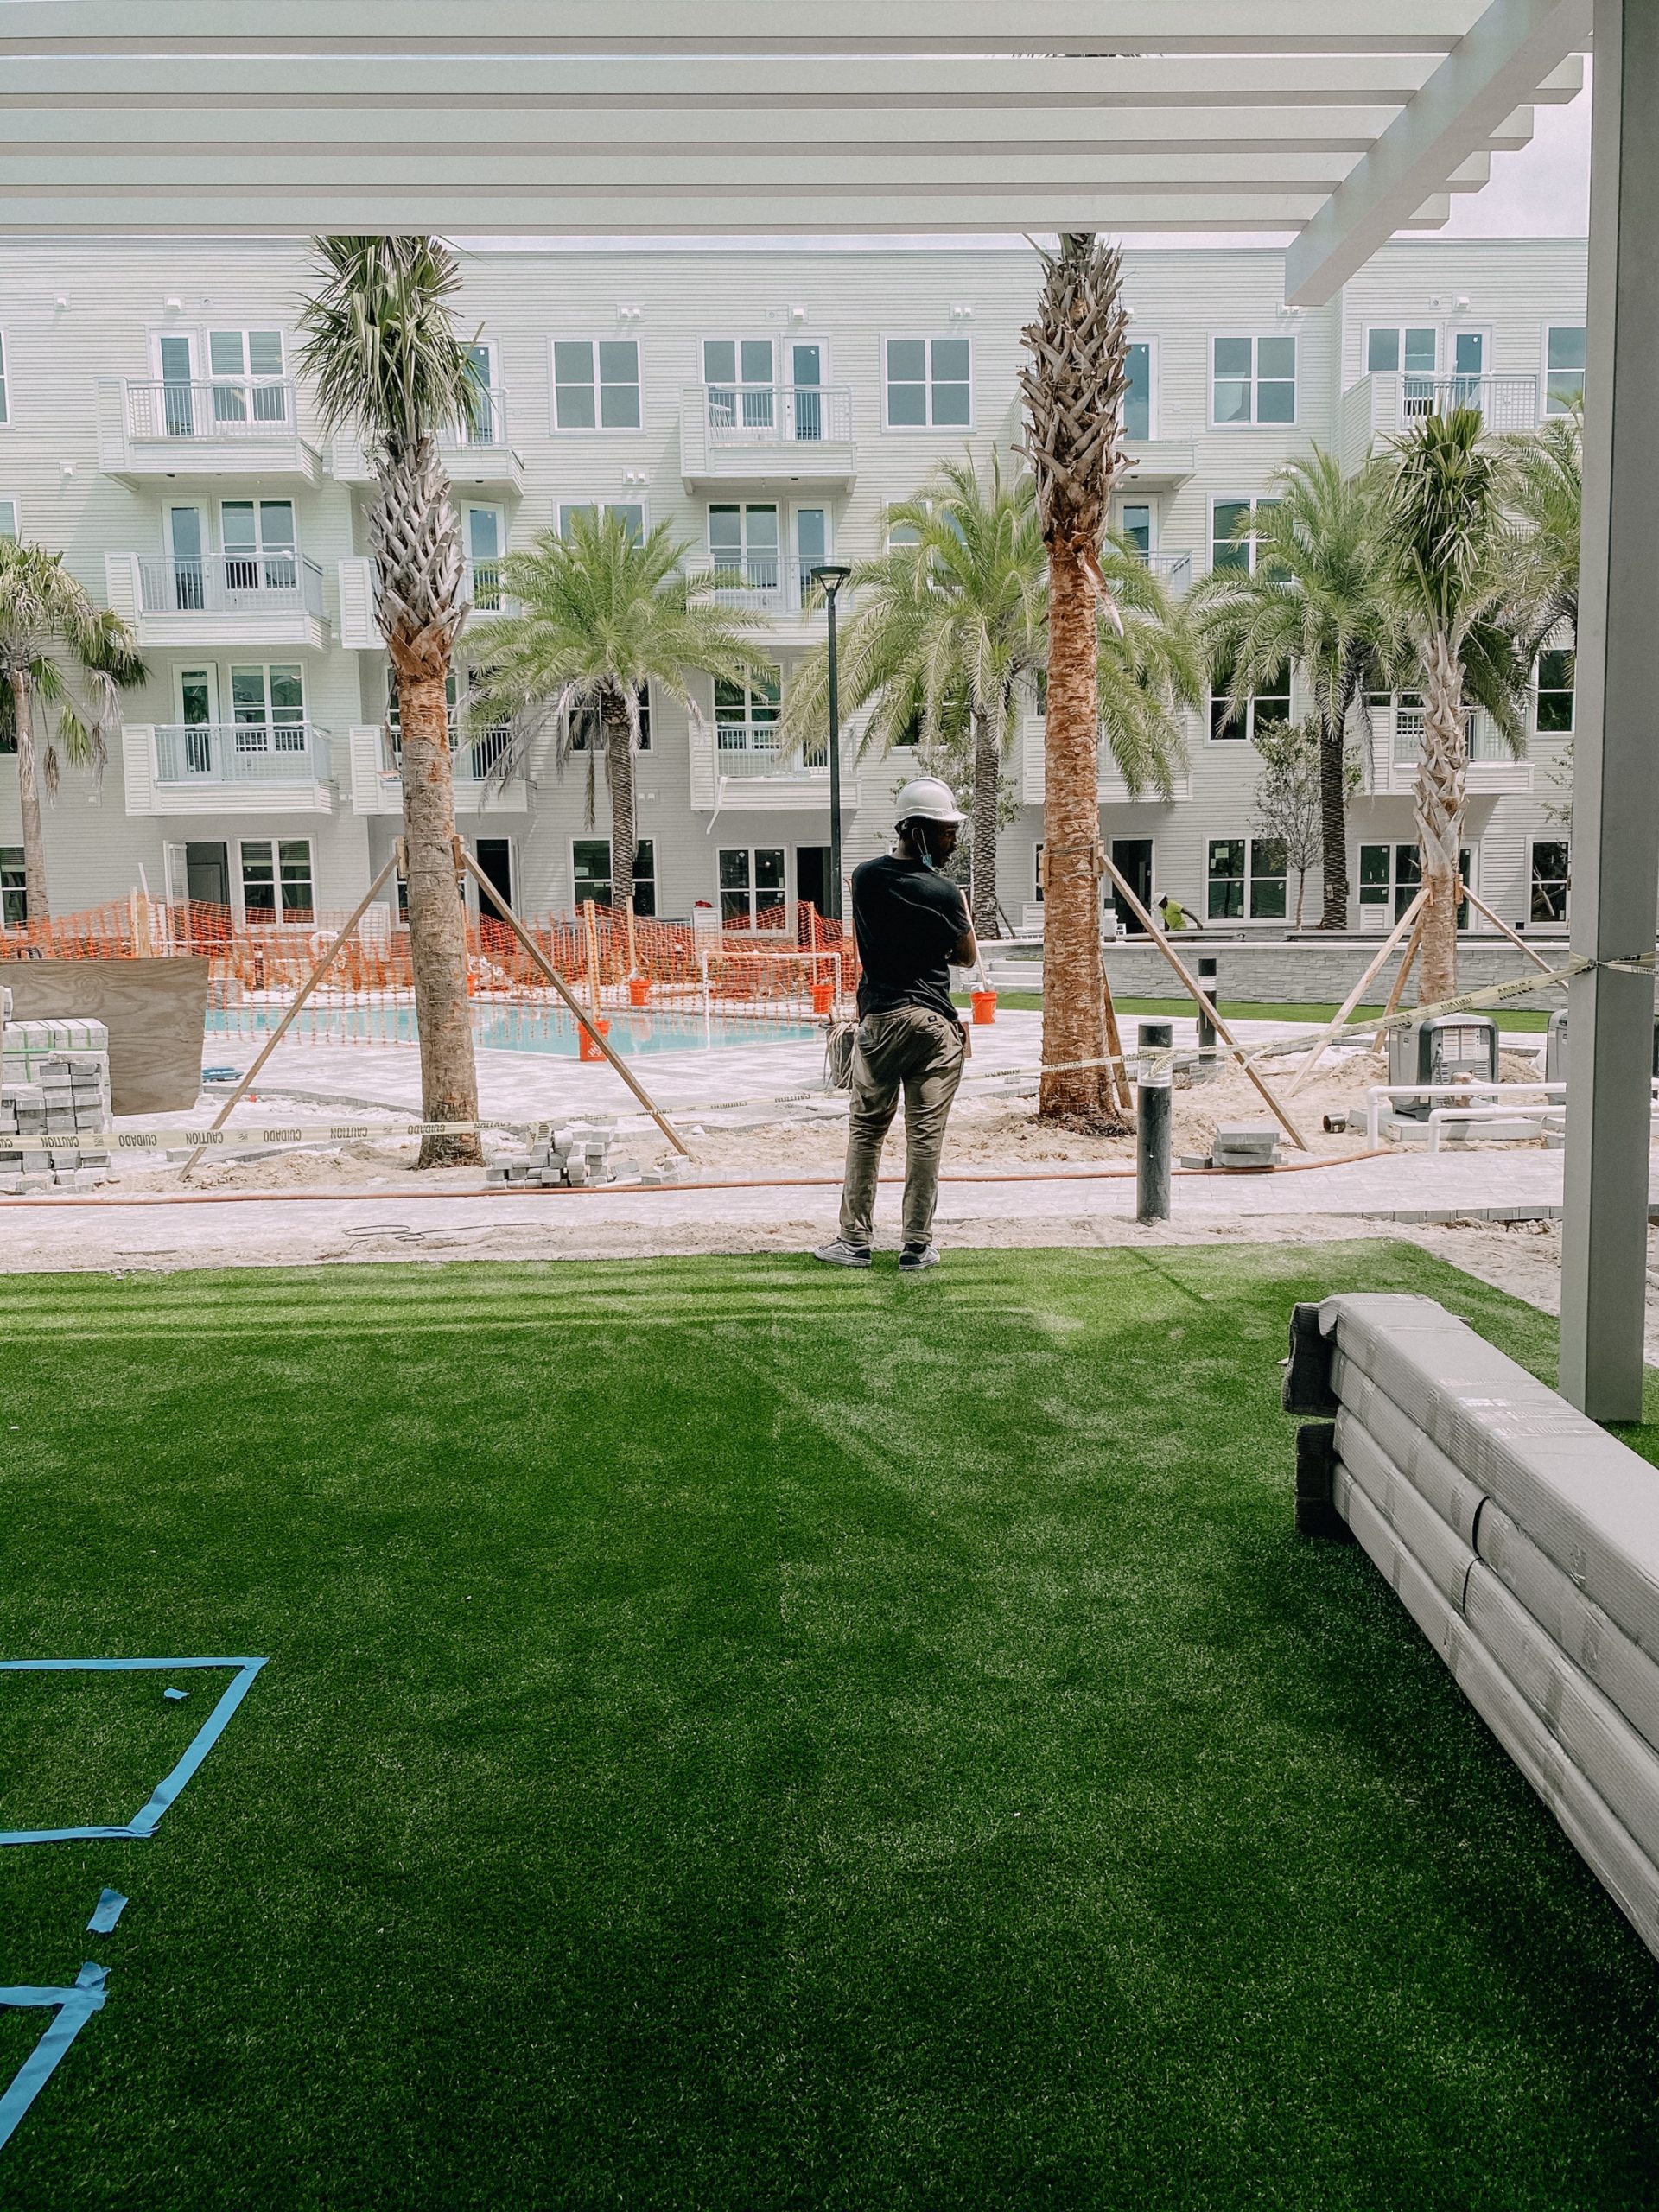 Courtyard at Liv+ Gainesville Apartments With a Construction Worker in the Background